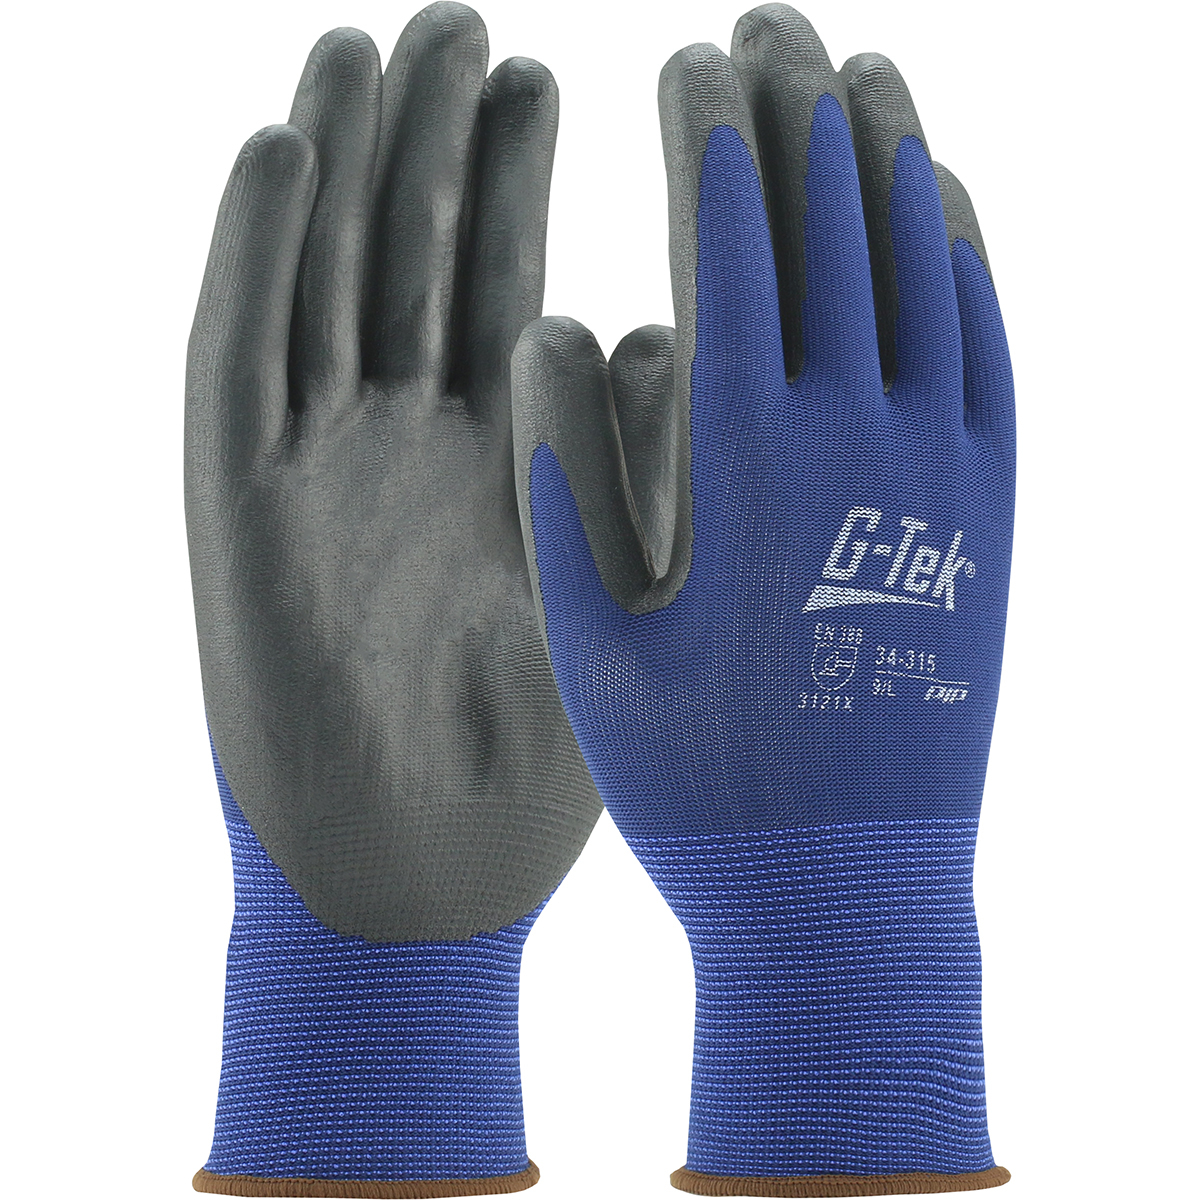 PIP® G-Tek® 34-315L Seamless Knit Polyester Glove with Nitrile Coated Foam Grip on Palm & Fingers - 15 Gauge